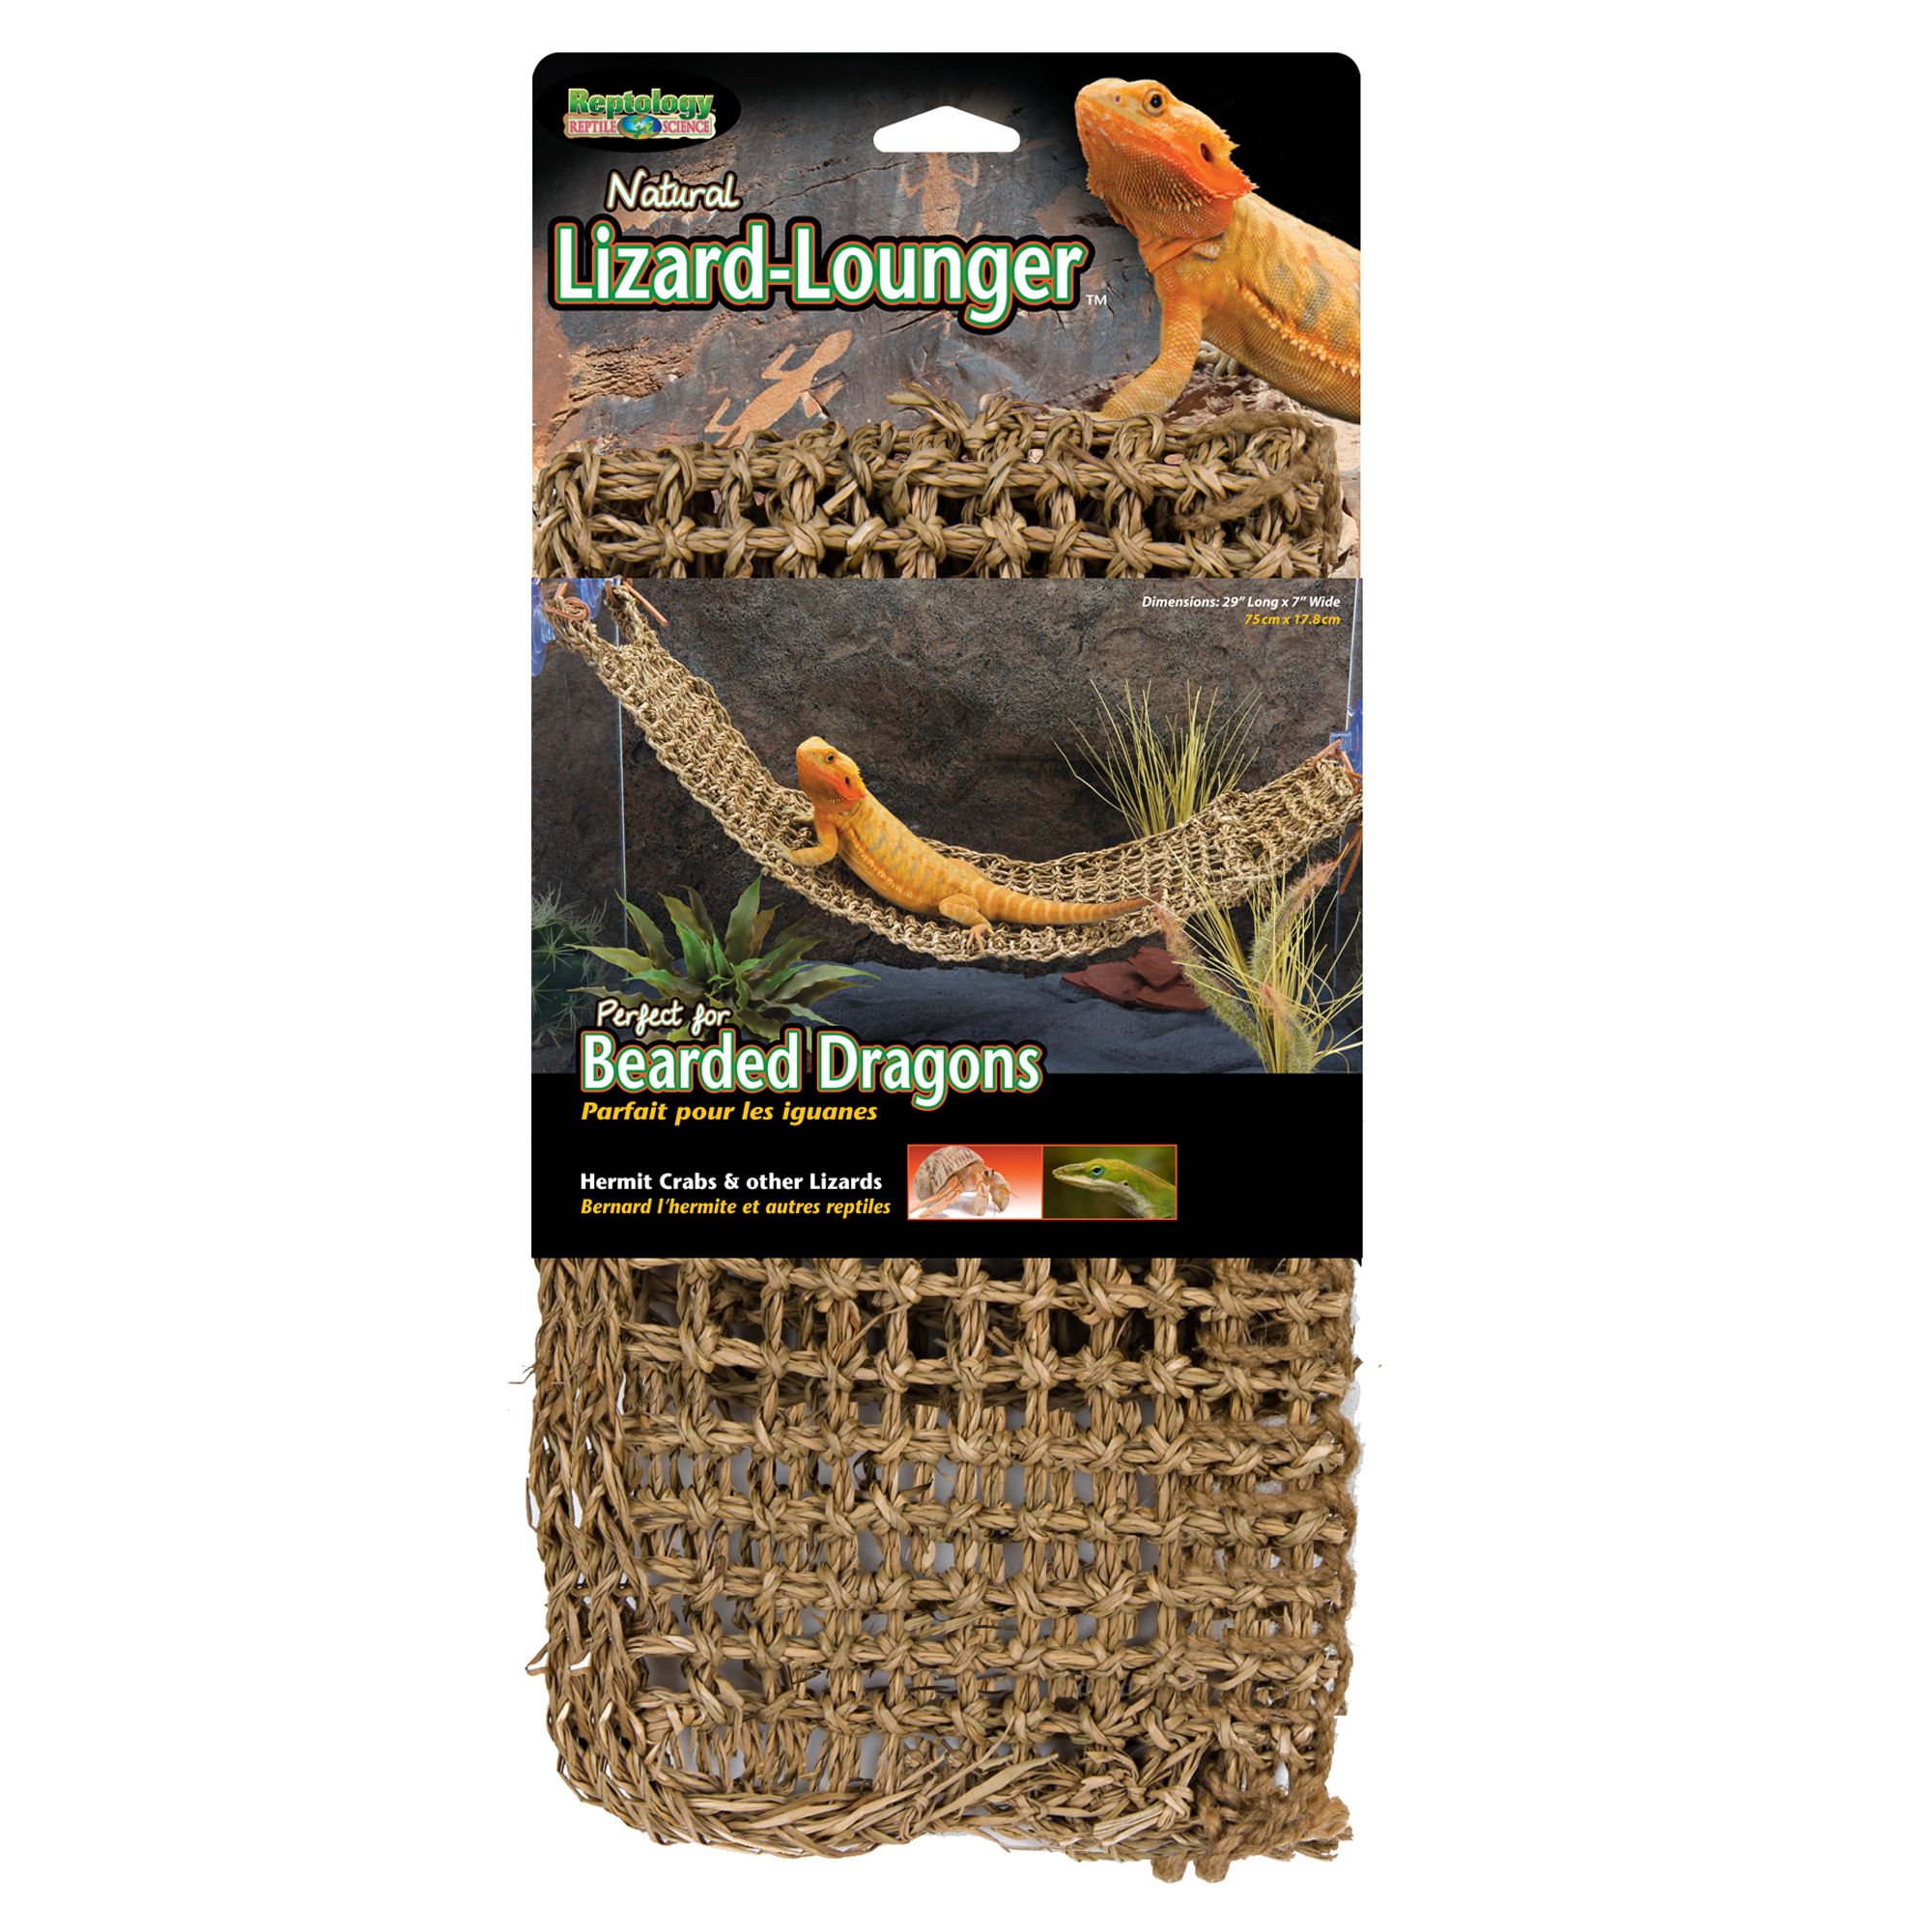 WATFOON Reptile Hammock Lizard Lounger,Oder-Free Mesh Strong Suction Cups